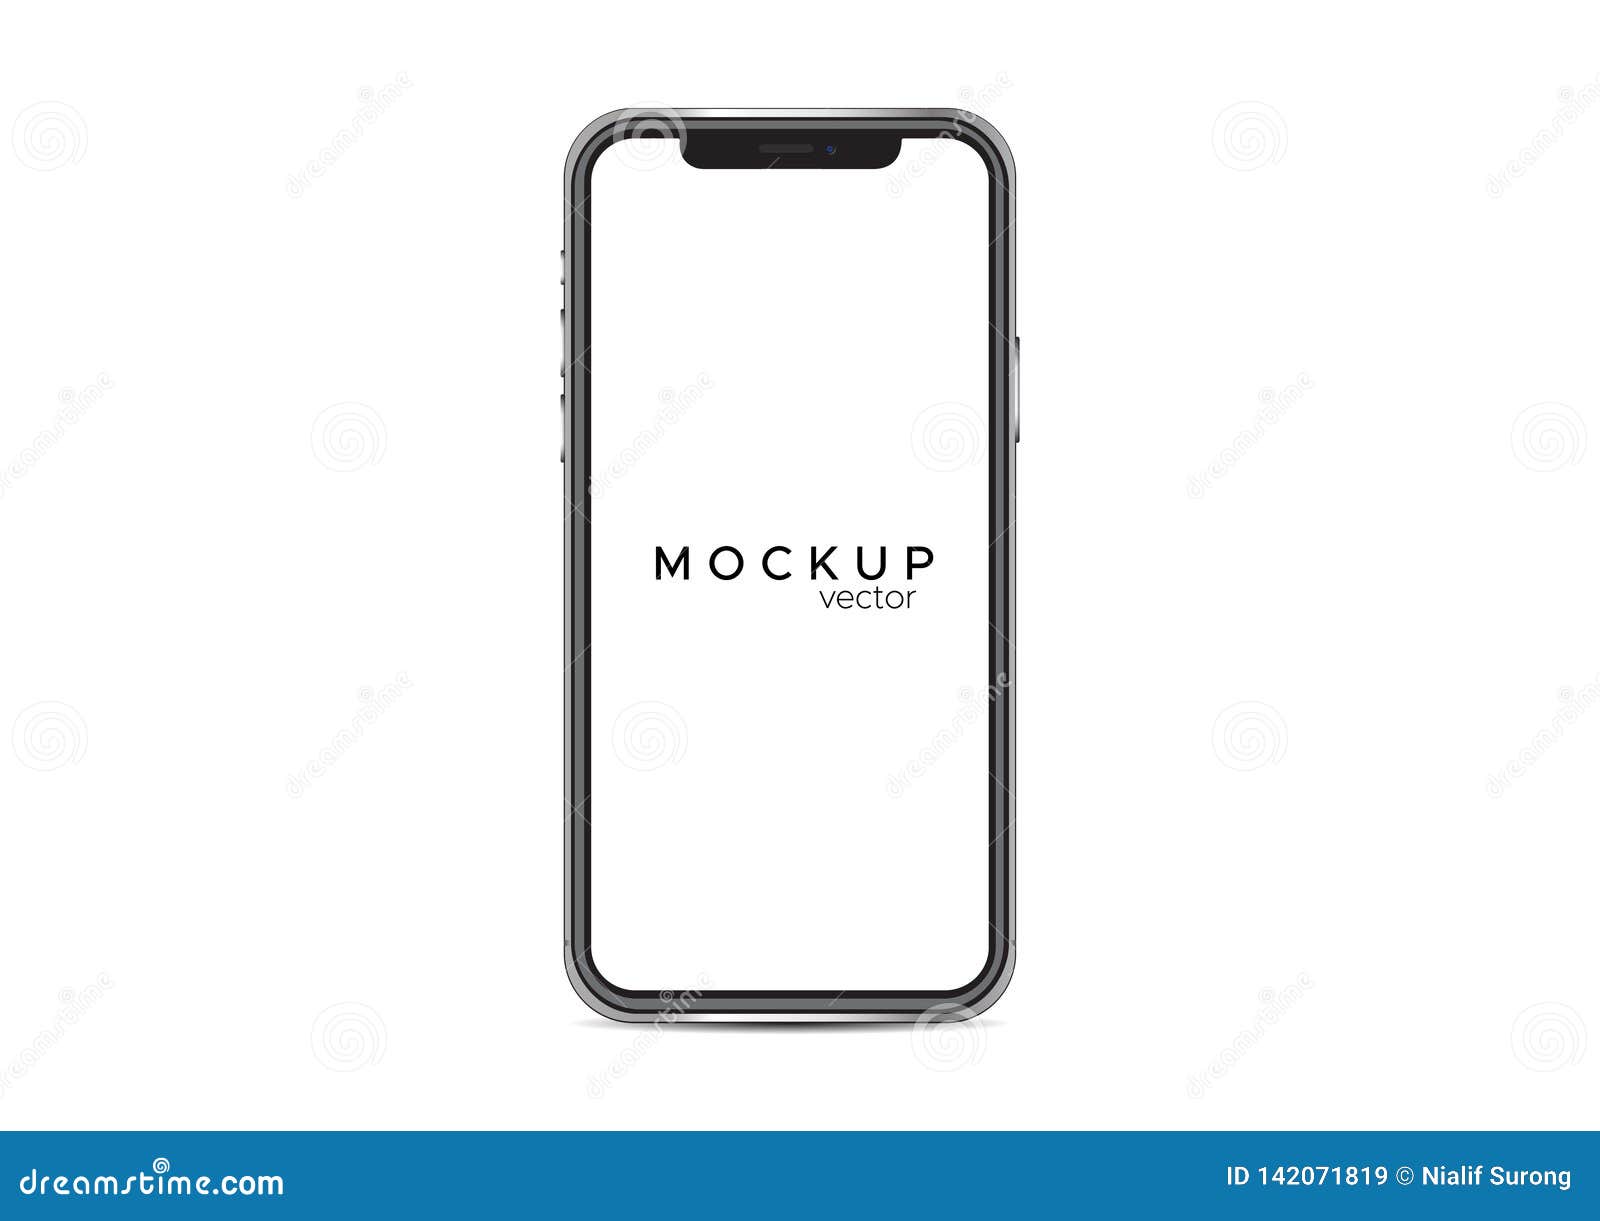 Download Iphone X Mockup Isolated On White Background Stock ...